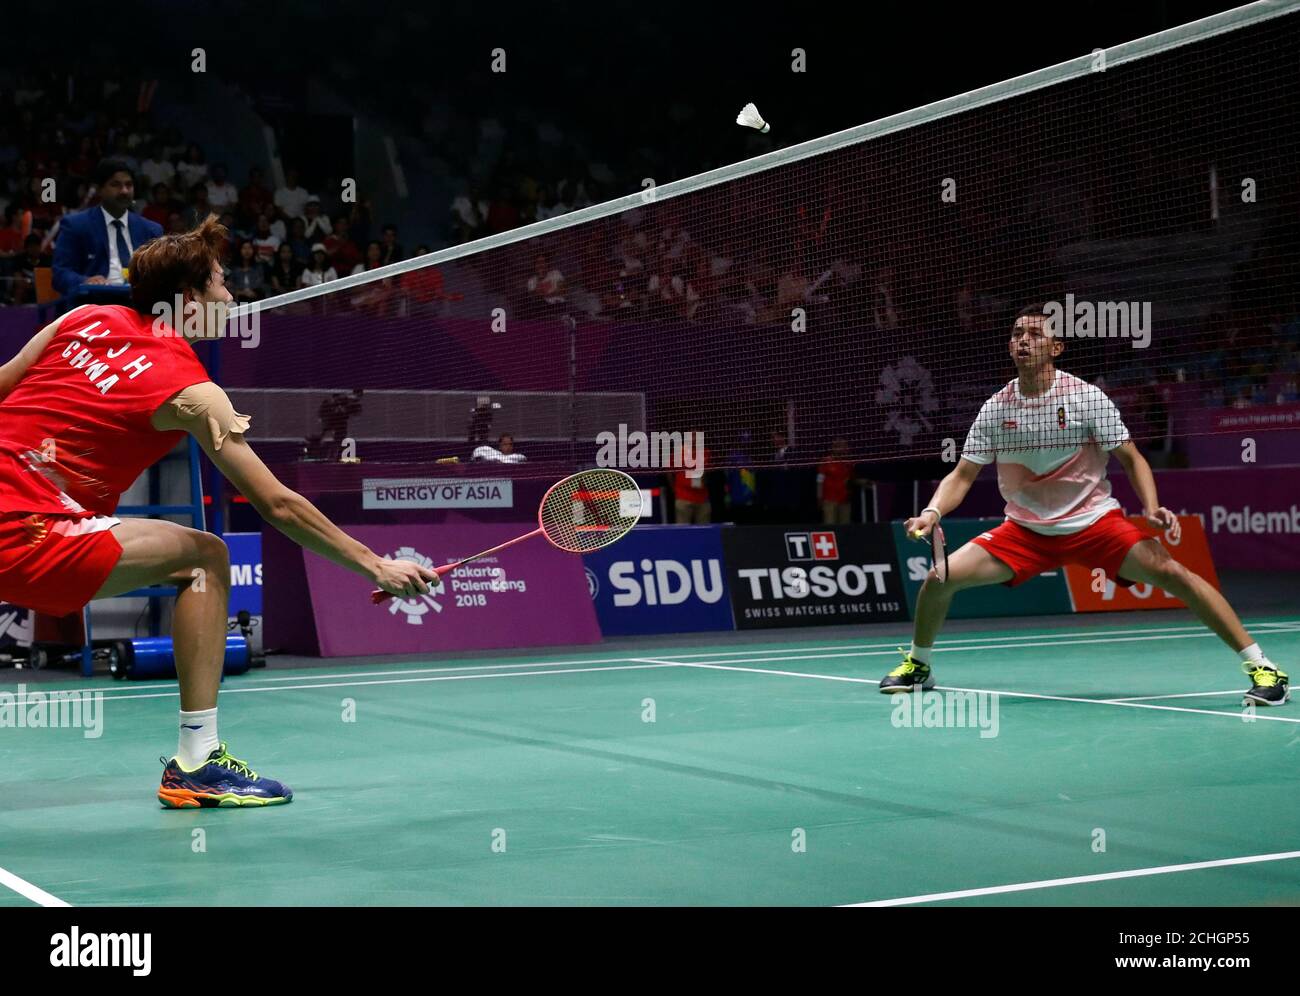 Badminton - 2018 Asian Games - Men's Doubles Semifinals - GBK - Istora -  Jakarta, Indonesia - August 27, 2018 - Muhammad Rian Ardianto of Indonesia  in action with Li Junhui of China. REUTERS/Cathal Mcnaughton Stock Photo -  Alamy